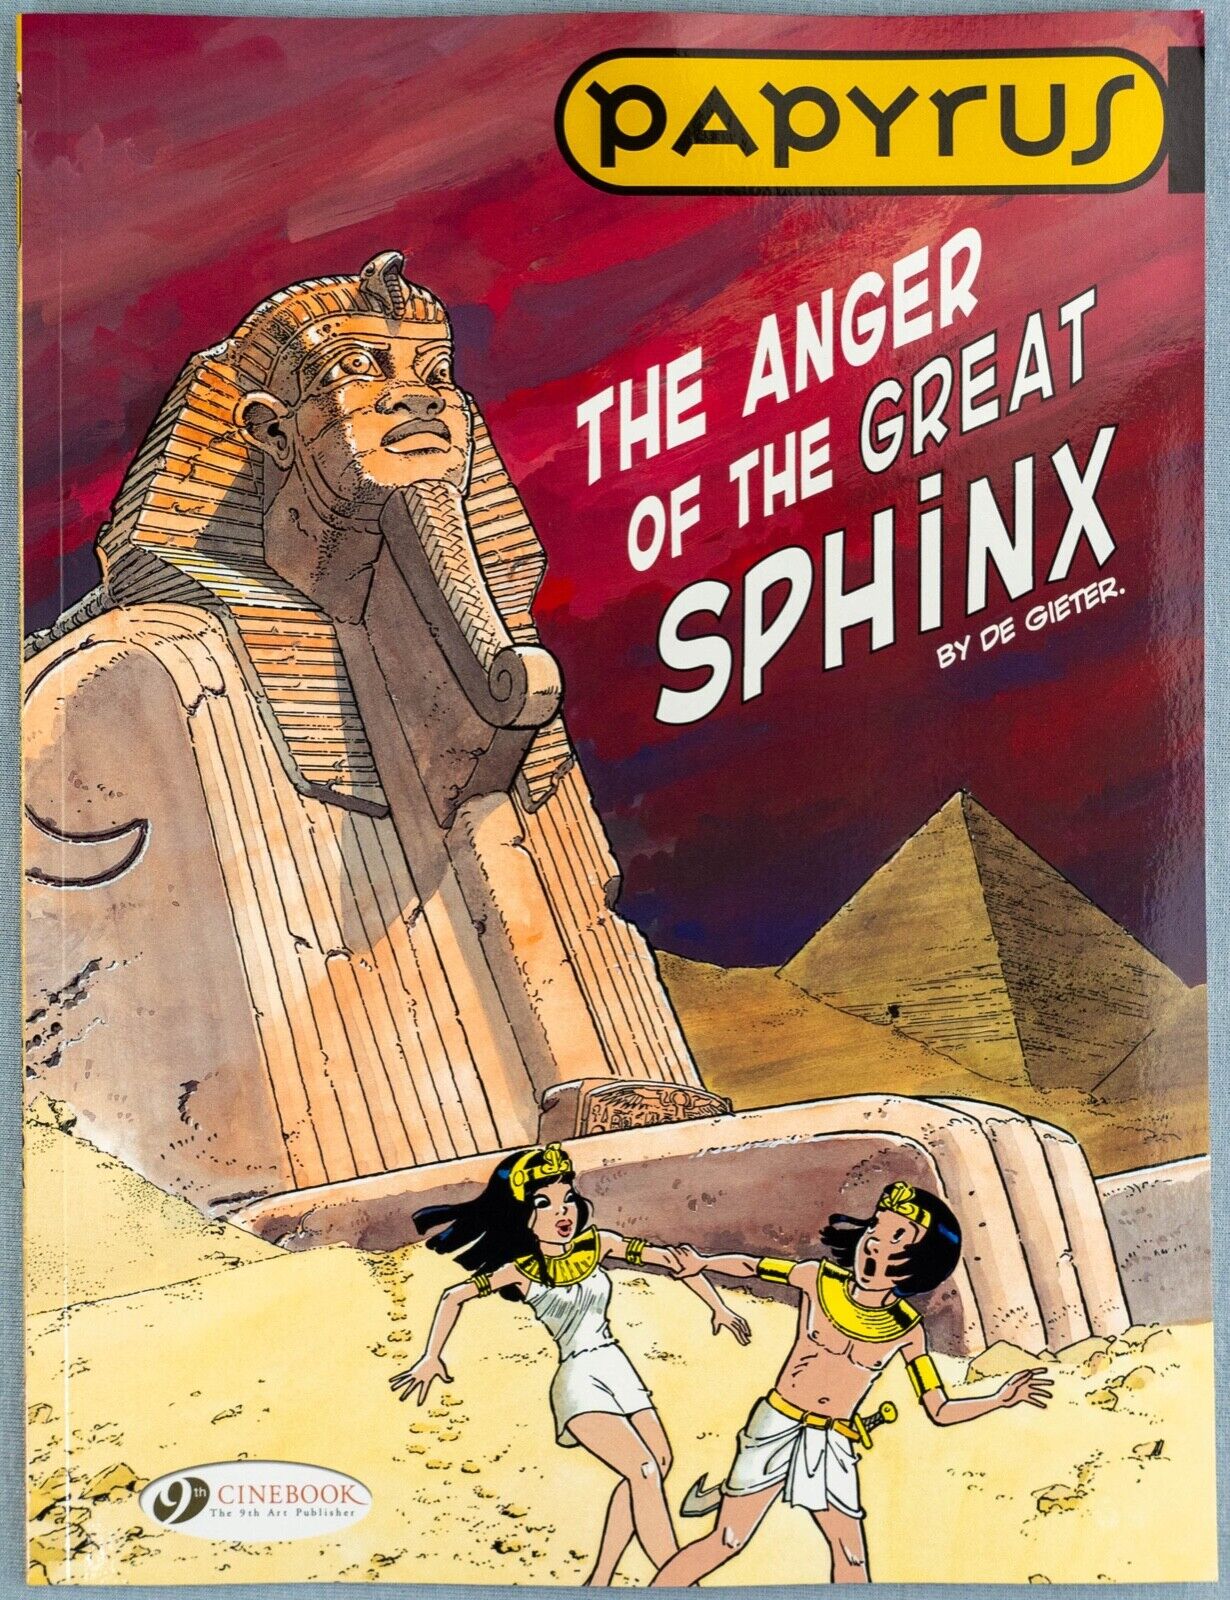 PAPYRUS Volume 5 - The Anger of the Great Sphinx Cinebook Paperback Comic Book by De Gieter